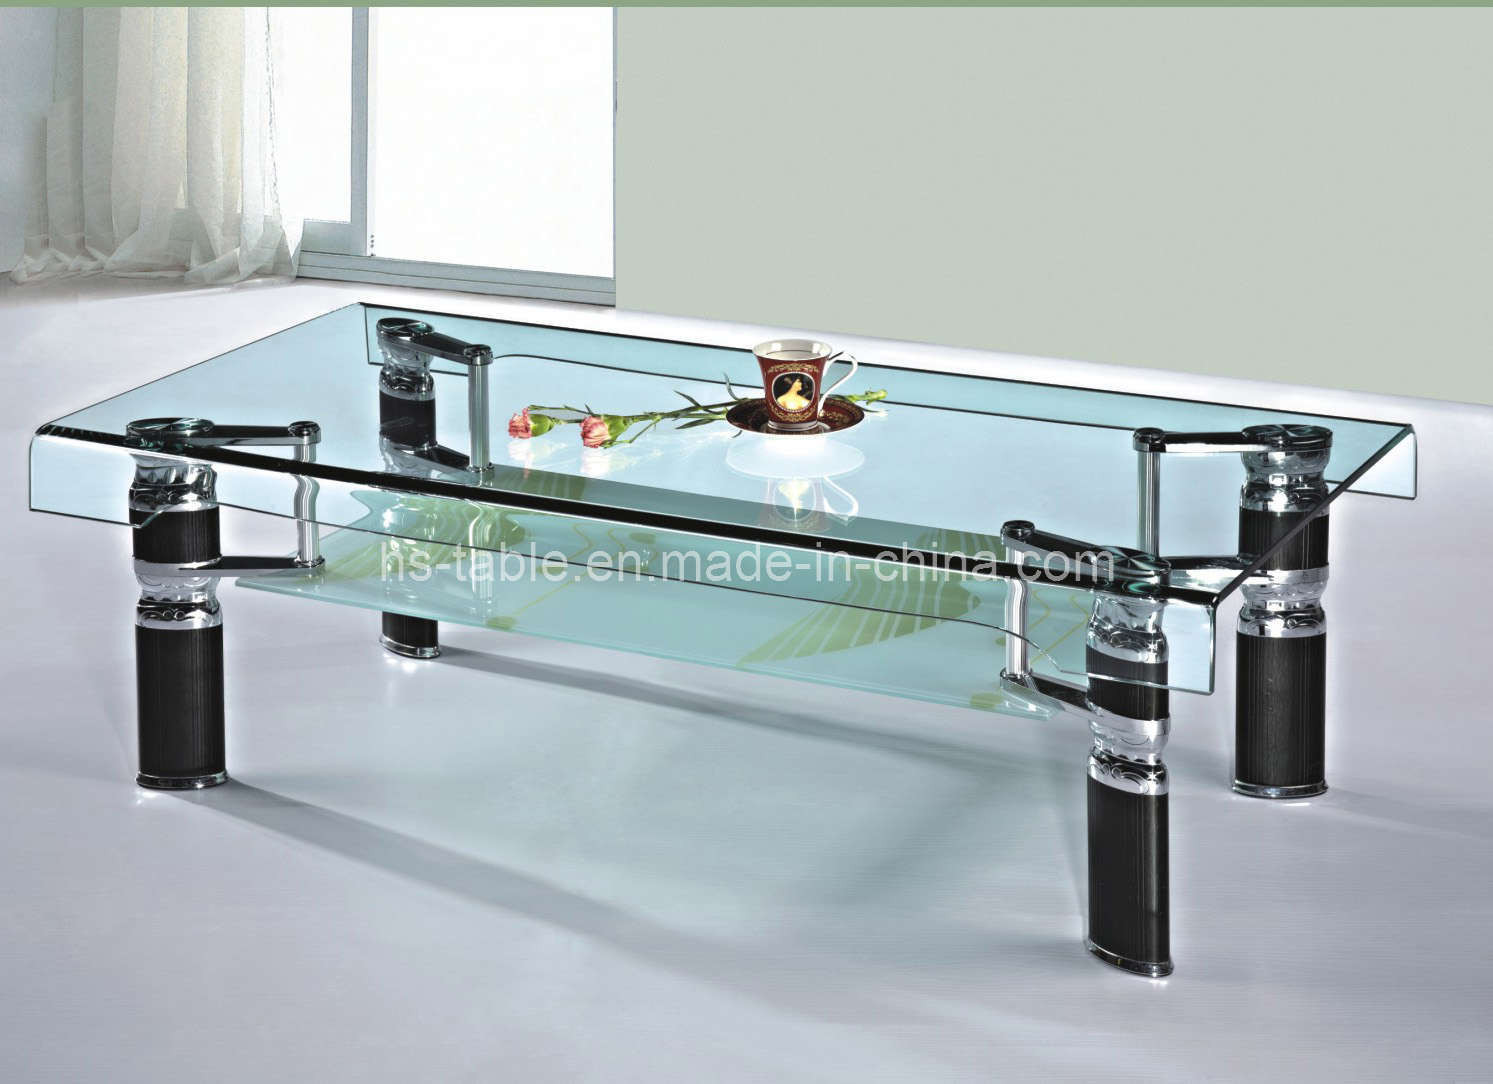 Living Room Glass Table
 China Bended Glass Coffee Table Living Room Furniture